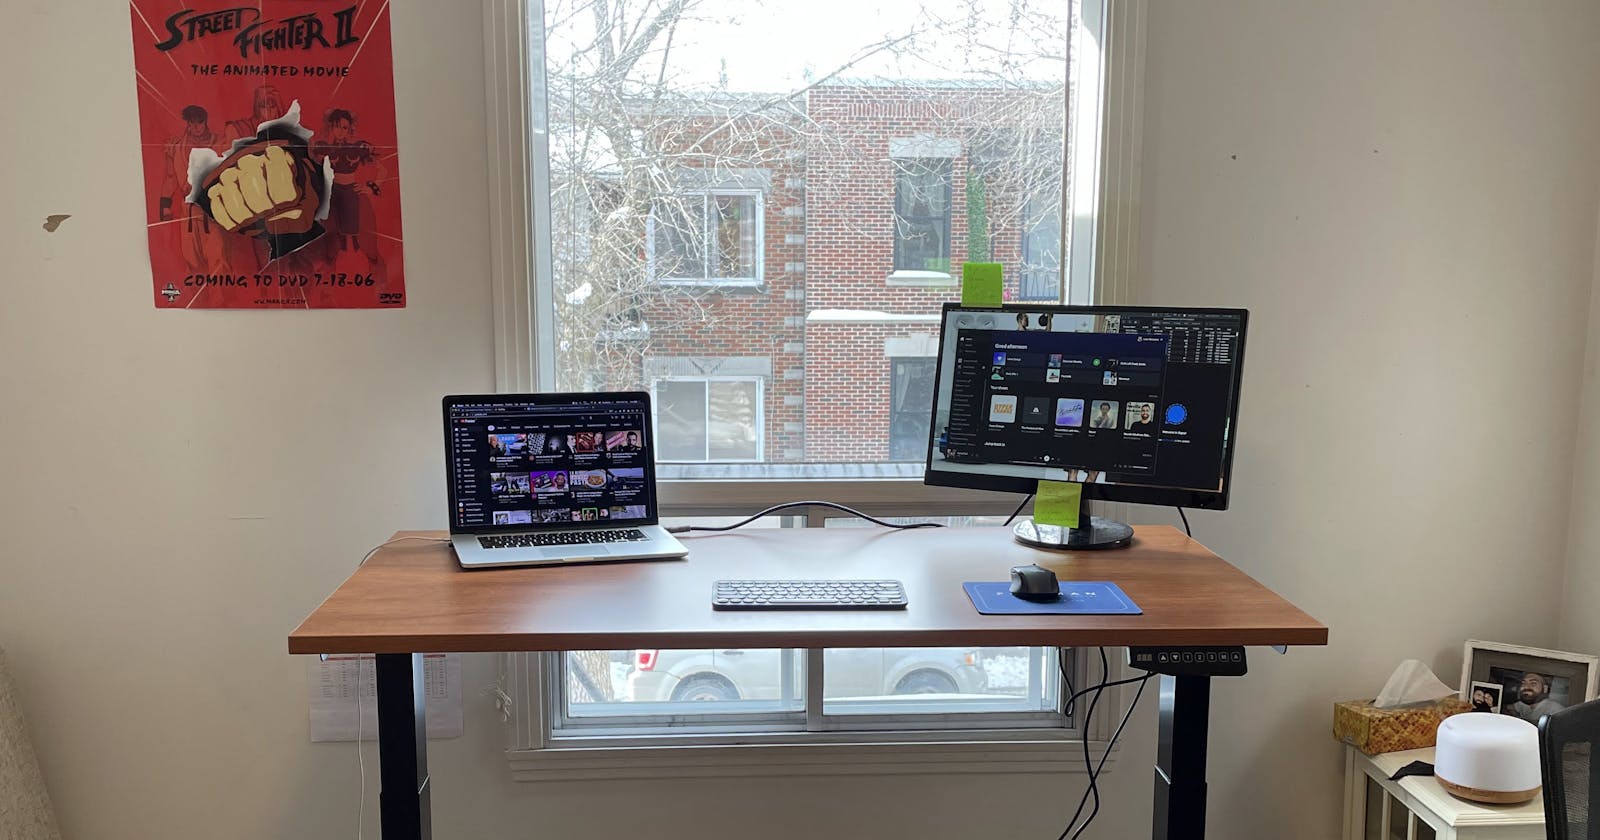 Standing desk review after 2 weeks: Vantage Plus by Rocky Mountain Desk Co